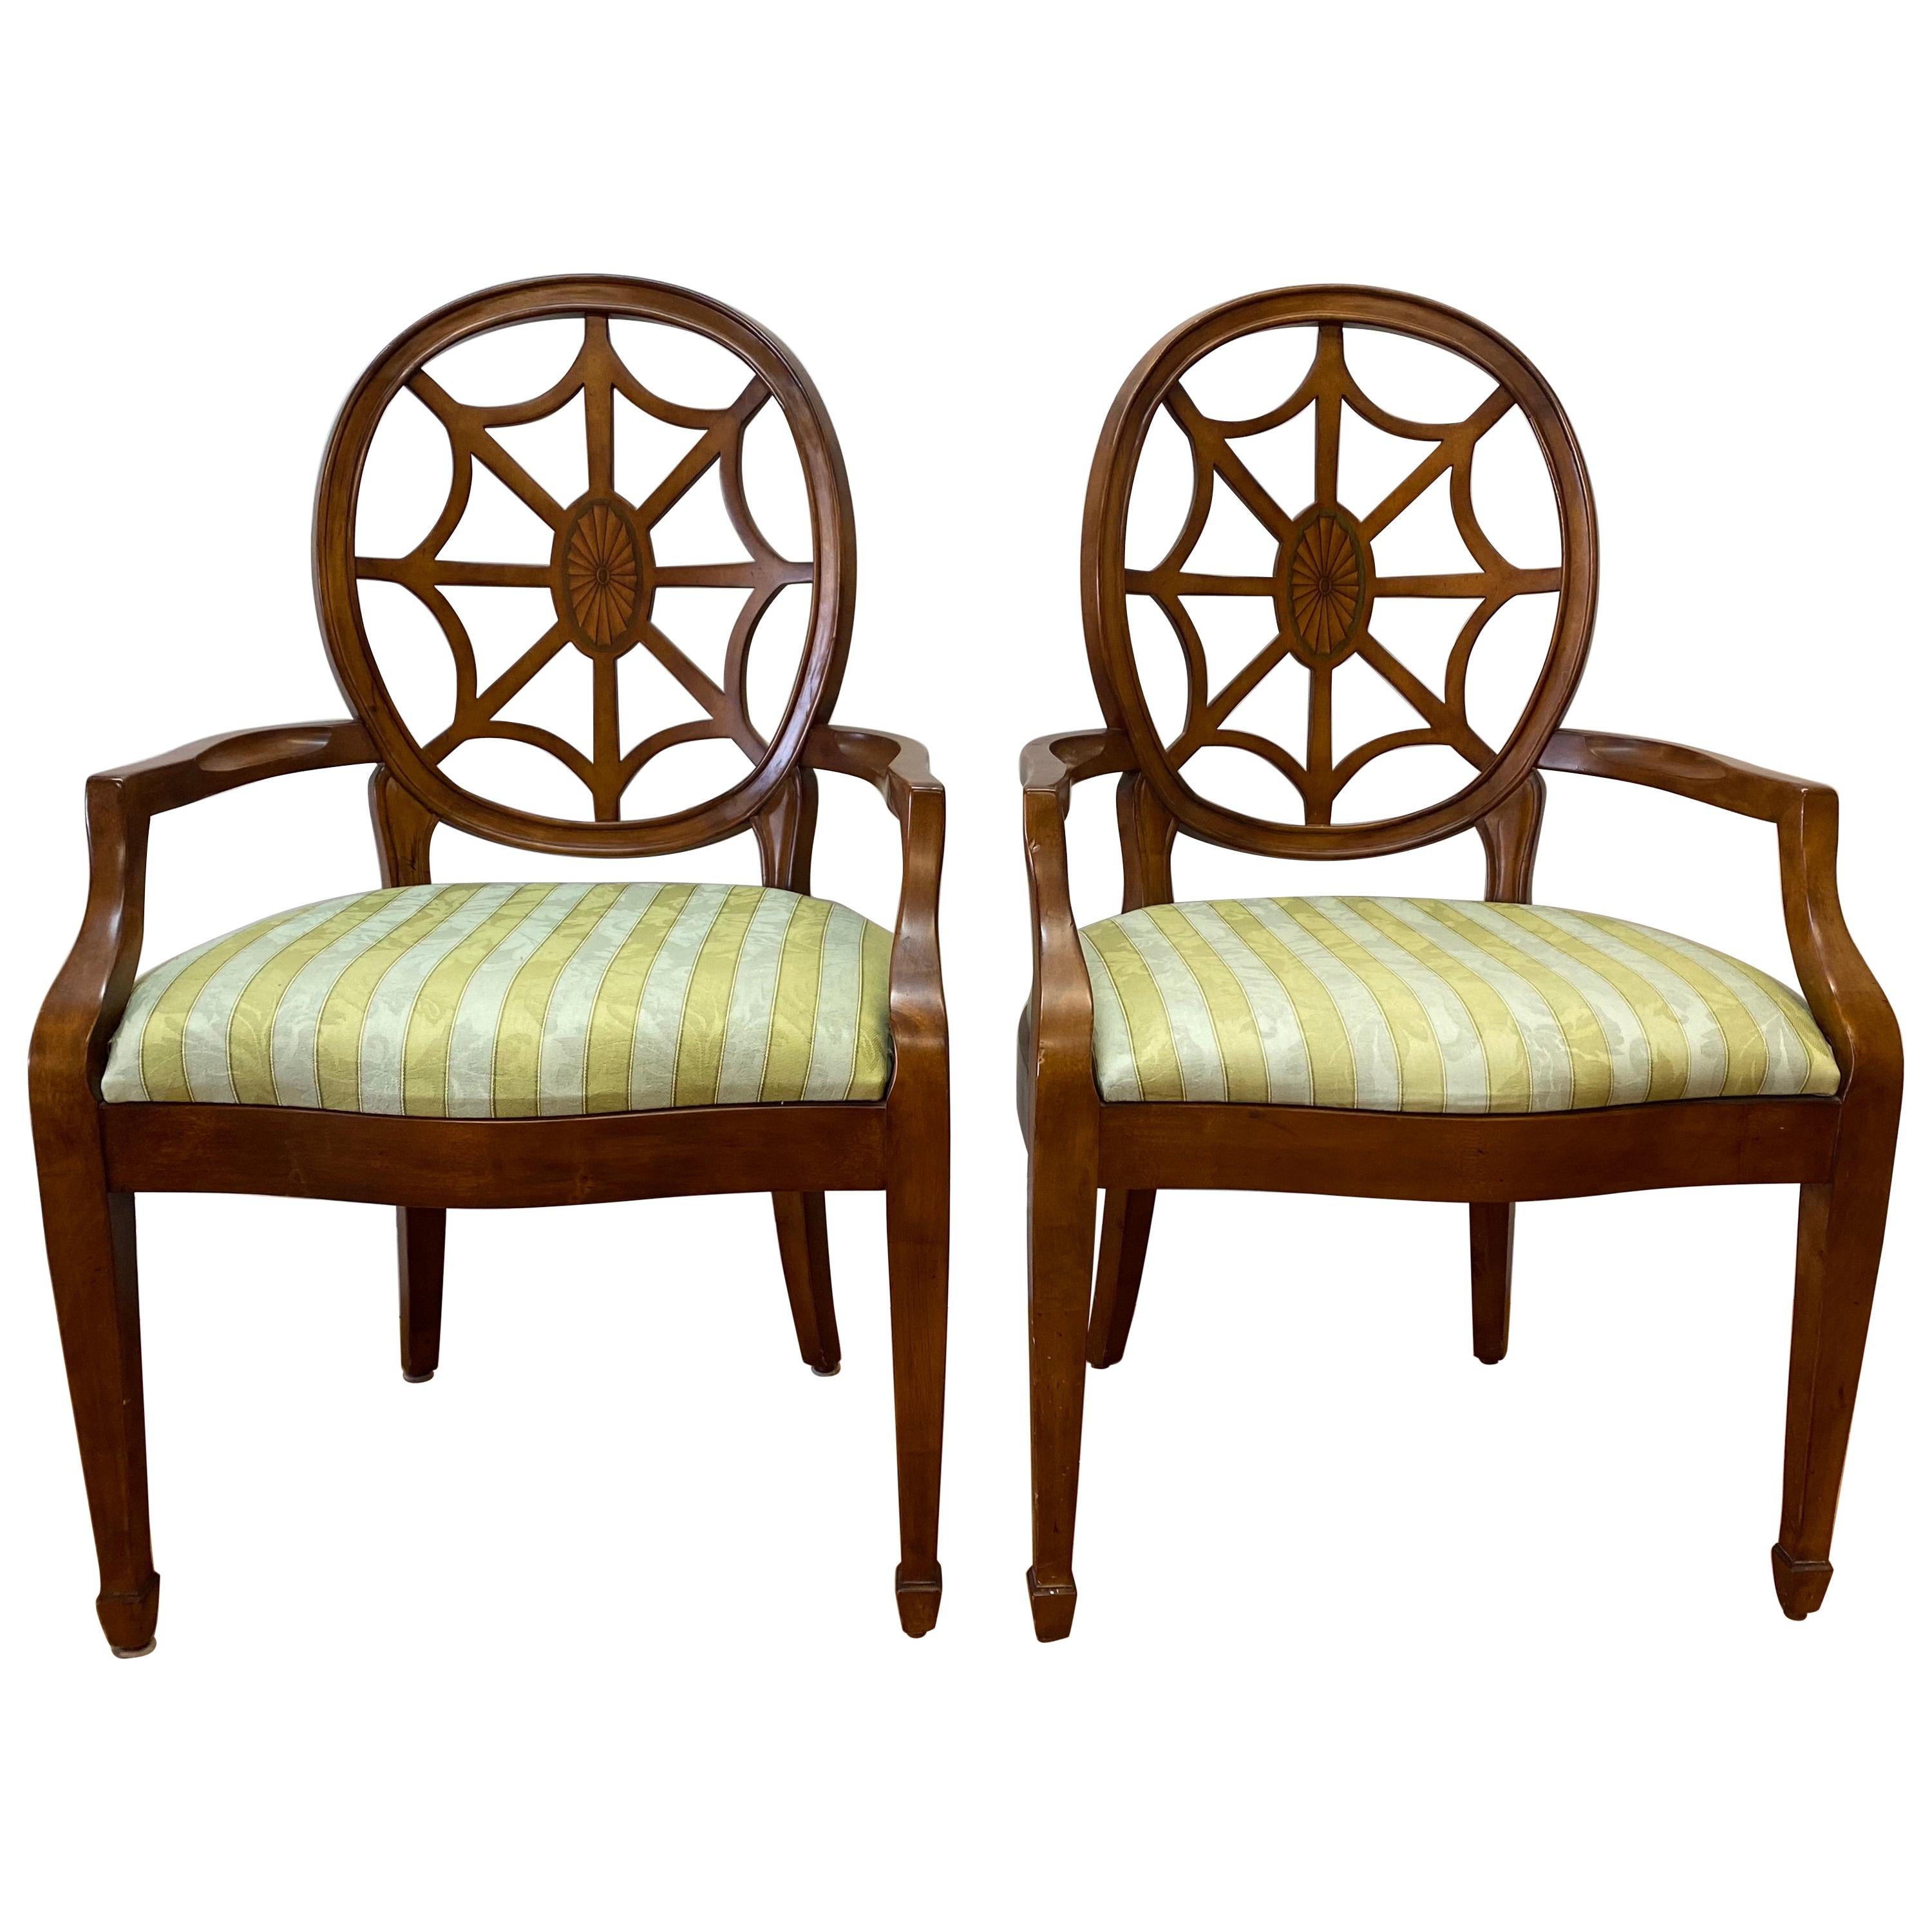 Pair of Contemporary Walnut Framed Upholstered Armchairs with Inlay